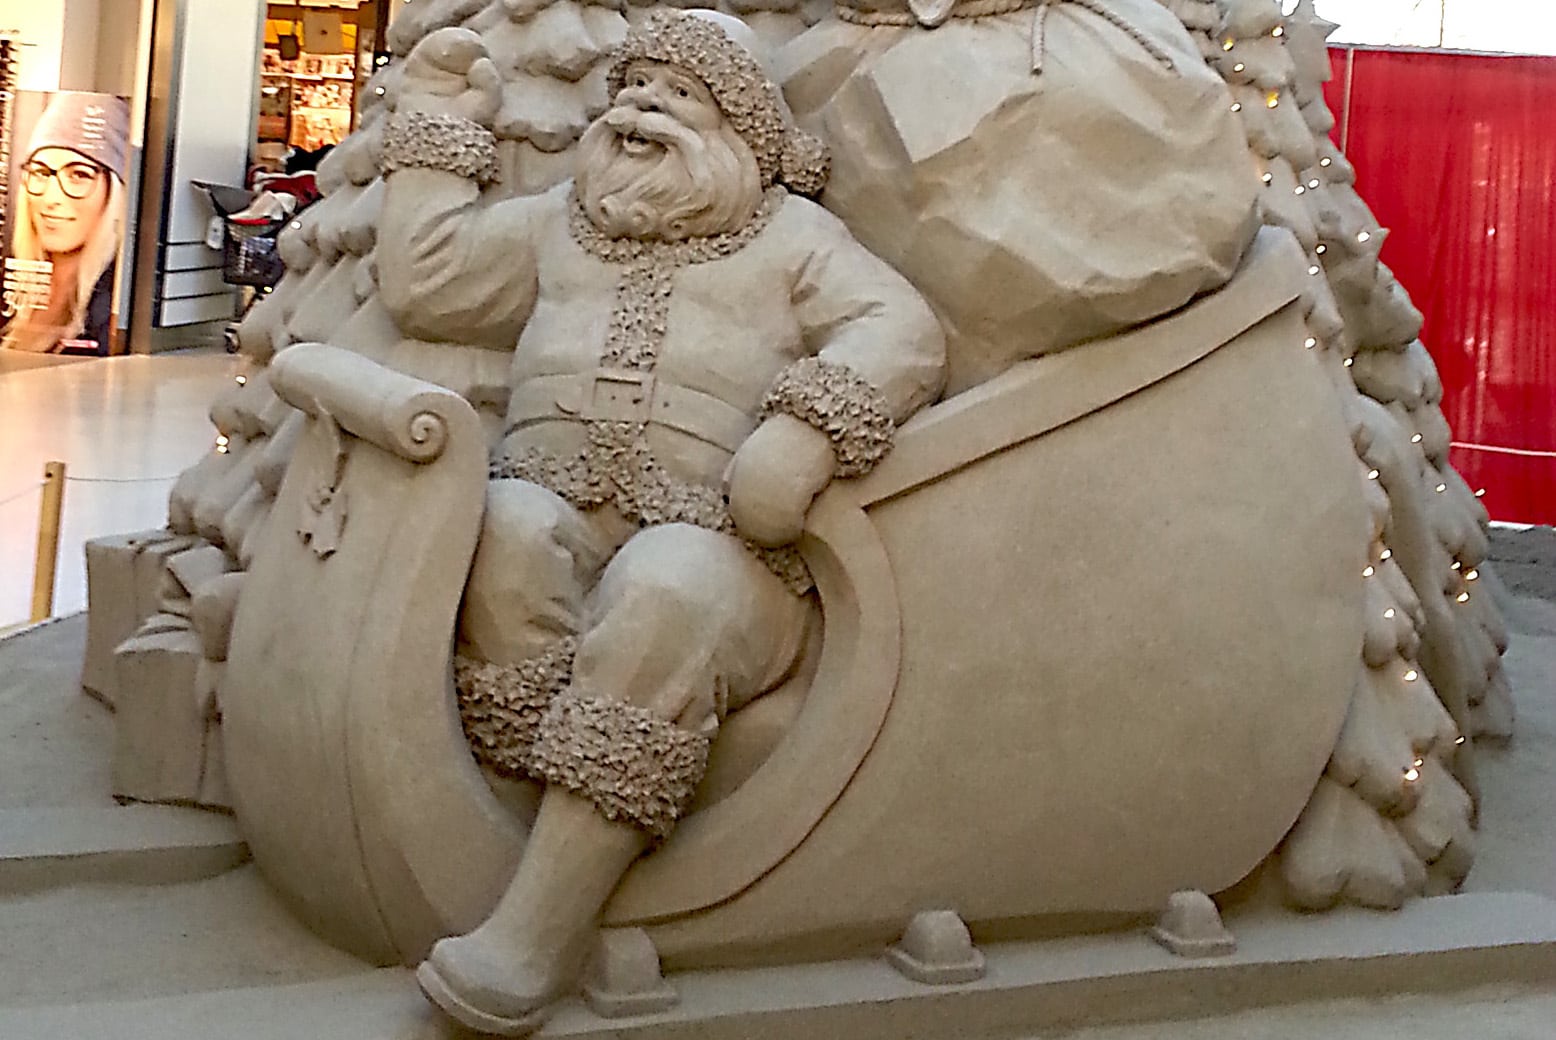 Sand sculptures are an attractive Christmas event